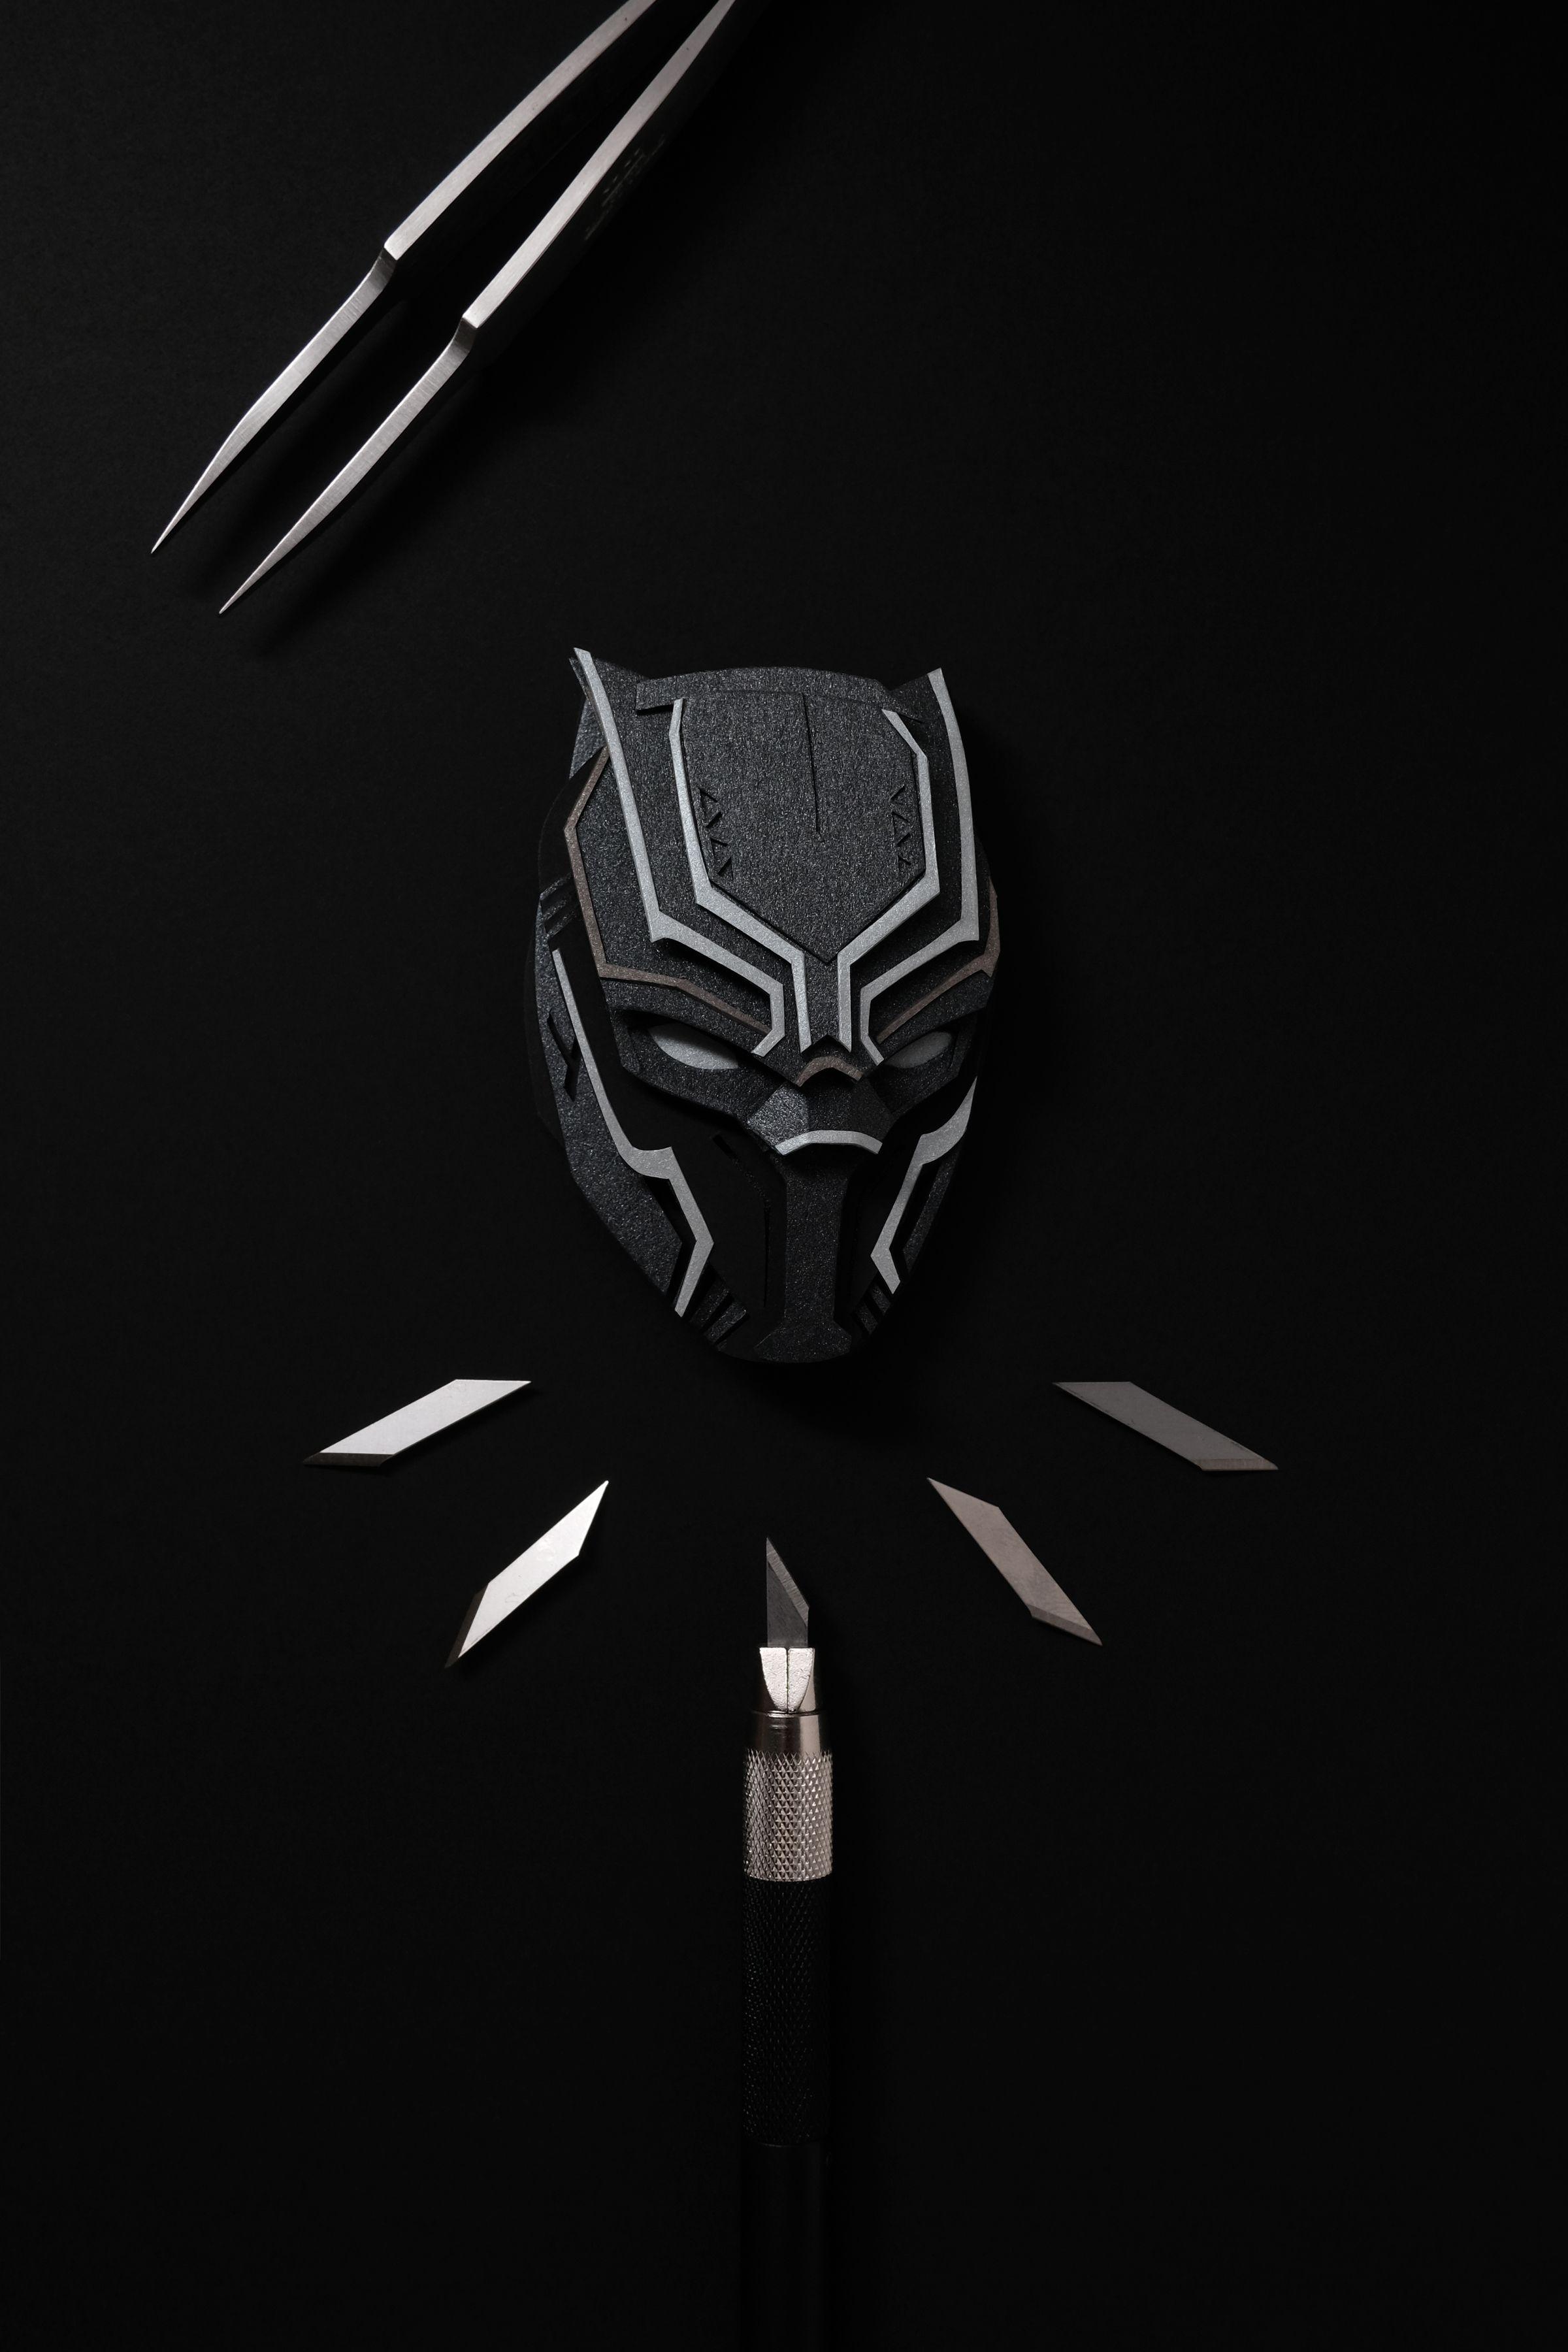 Making the Black Panther look sharp. Honored to be able to create